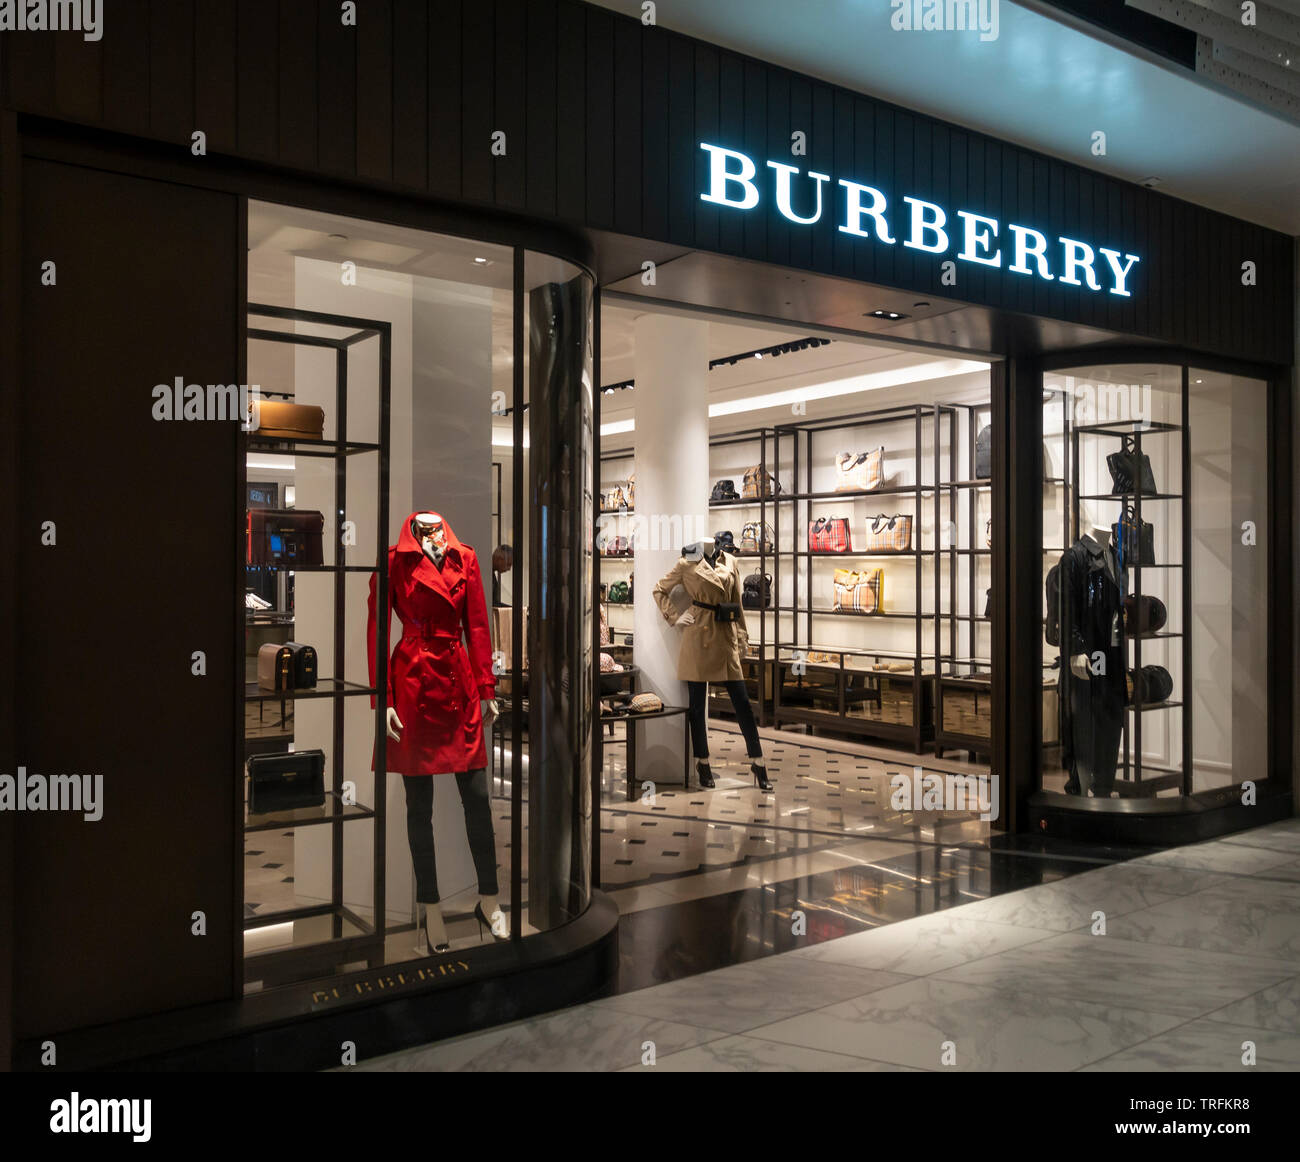 Frontage and entrance of the Burberry luxury clothes and bag retail unit /  shop at Schiphol Airport, Amsterdam Stock Photo - Alamy